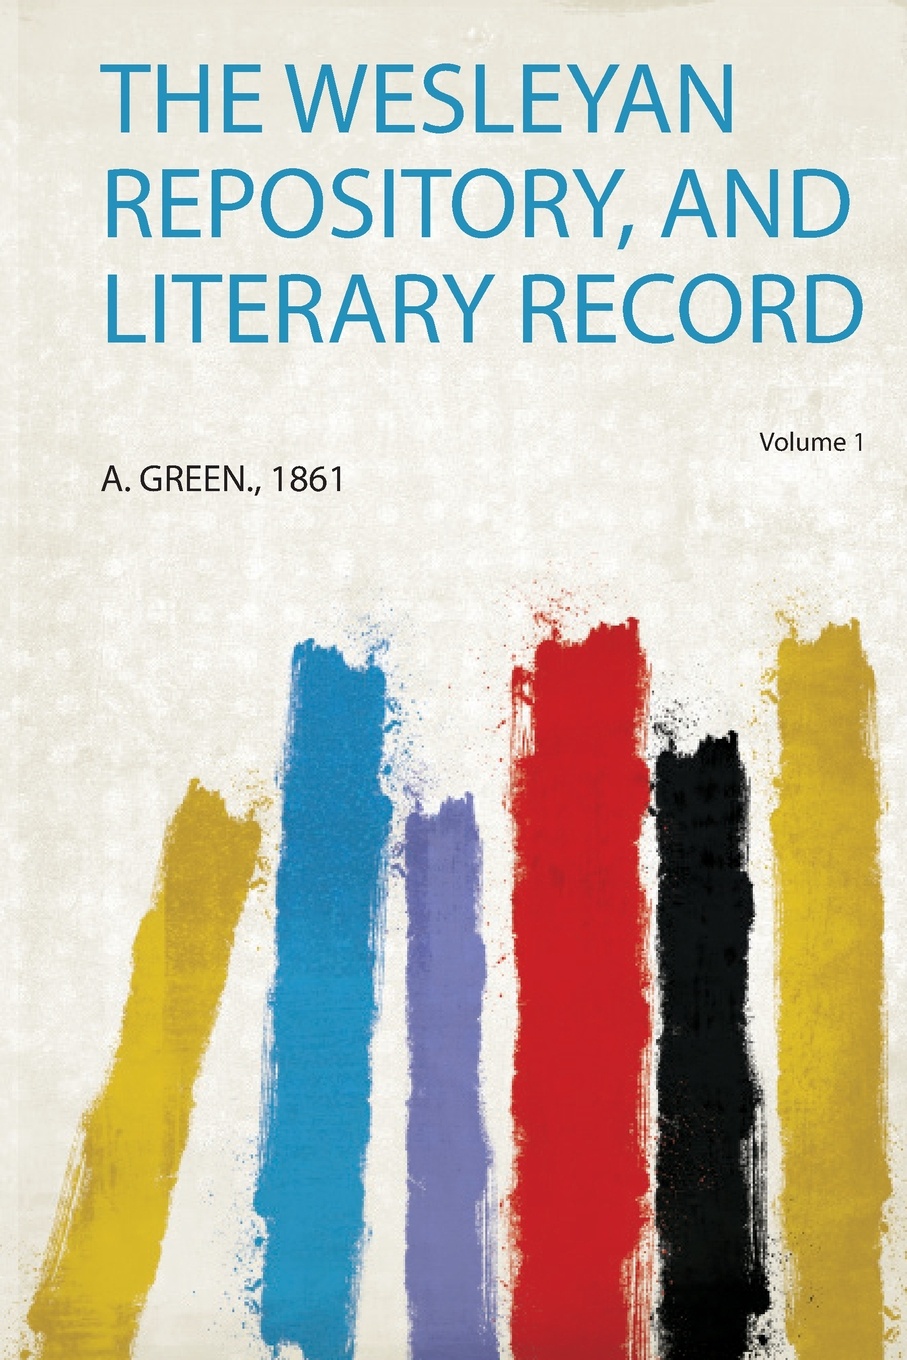 The Wesleyan Repository, and Literary Record